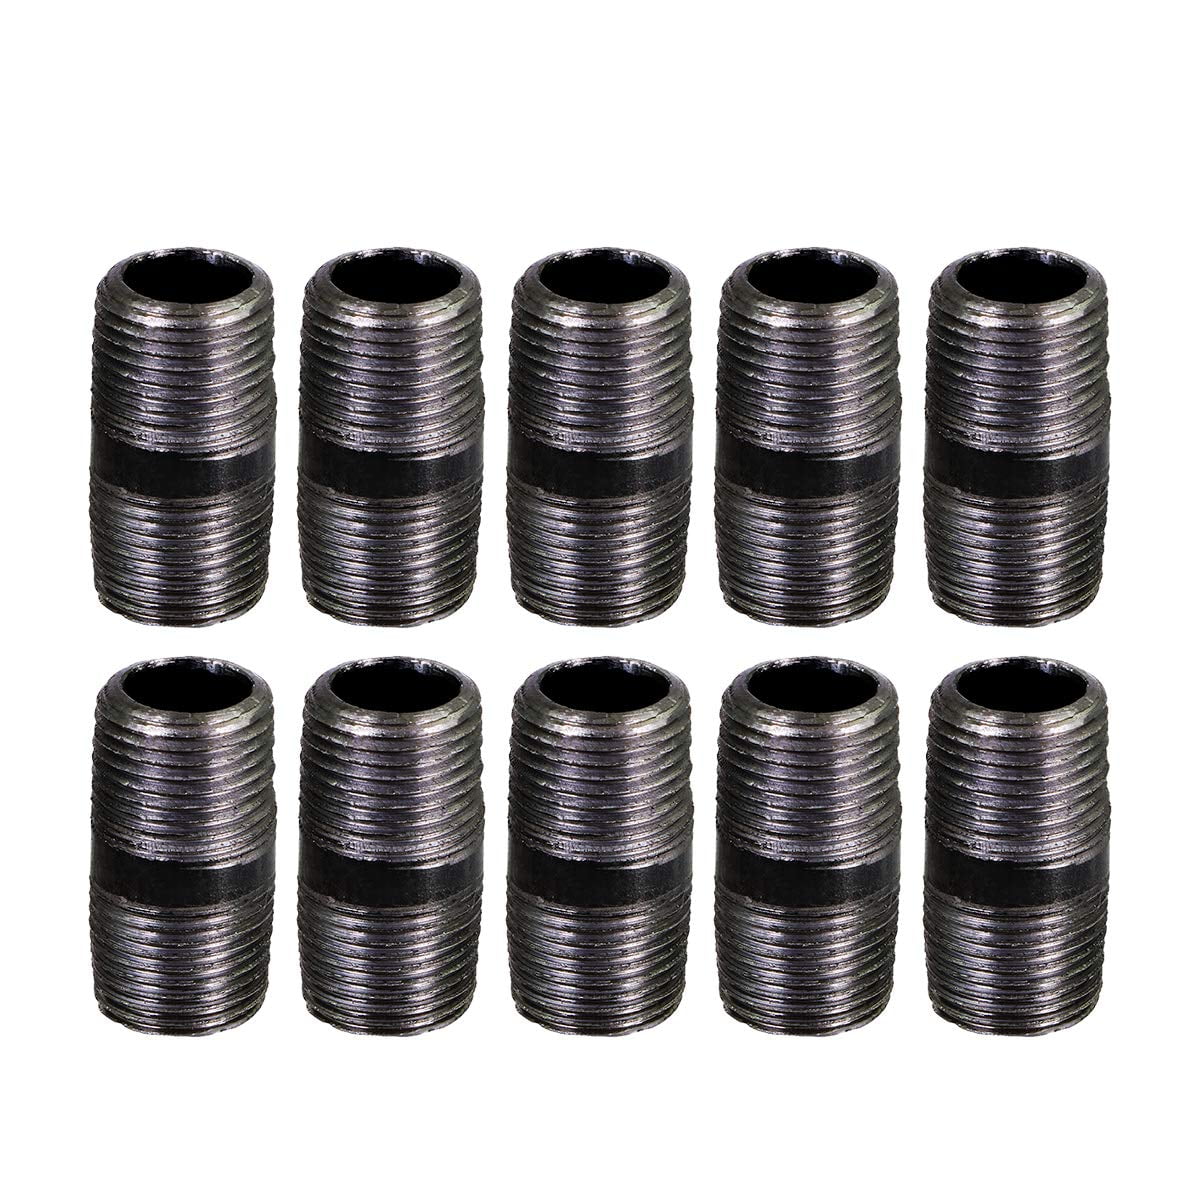 Pipe Sizes Close BLACK STEEL 1/2" Nipple Set 6" Pack malleable iron 